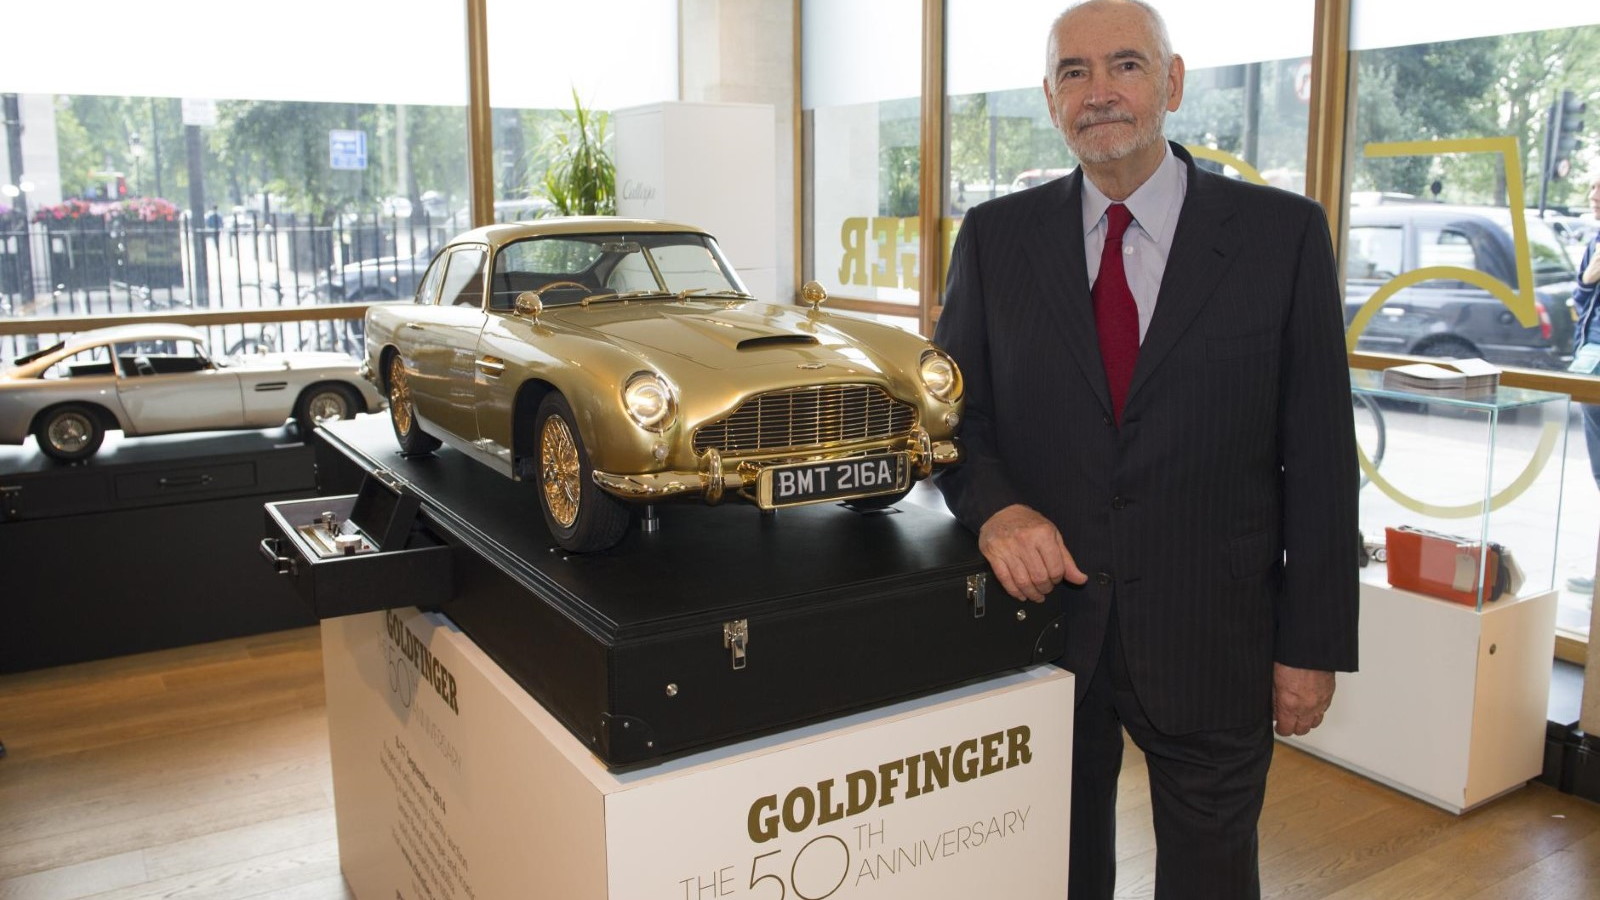 Gold-plated Aston Martin DB5 model, auctioned by Christie's